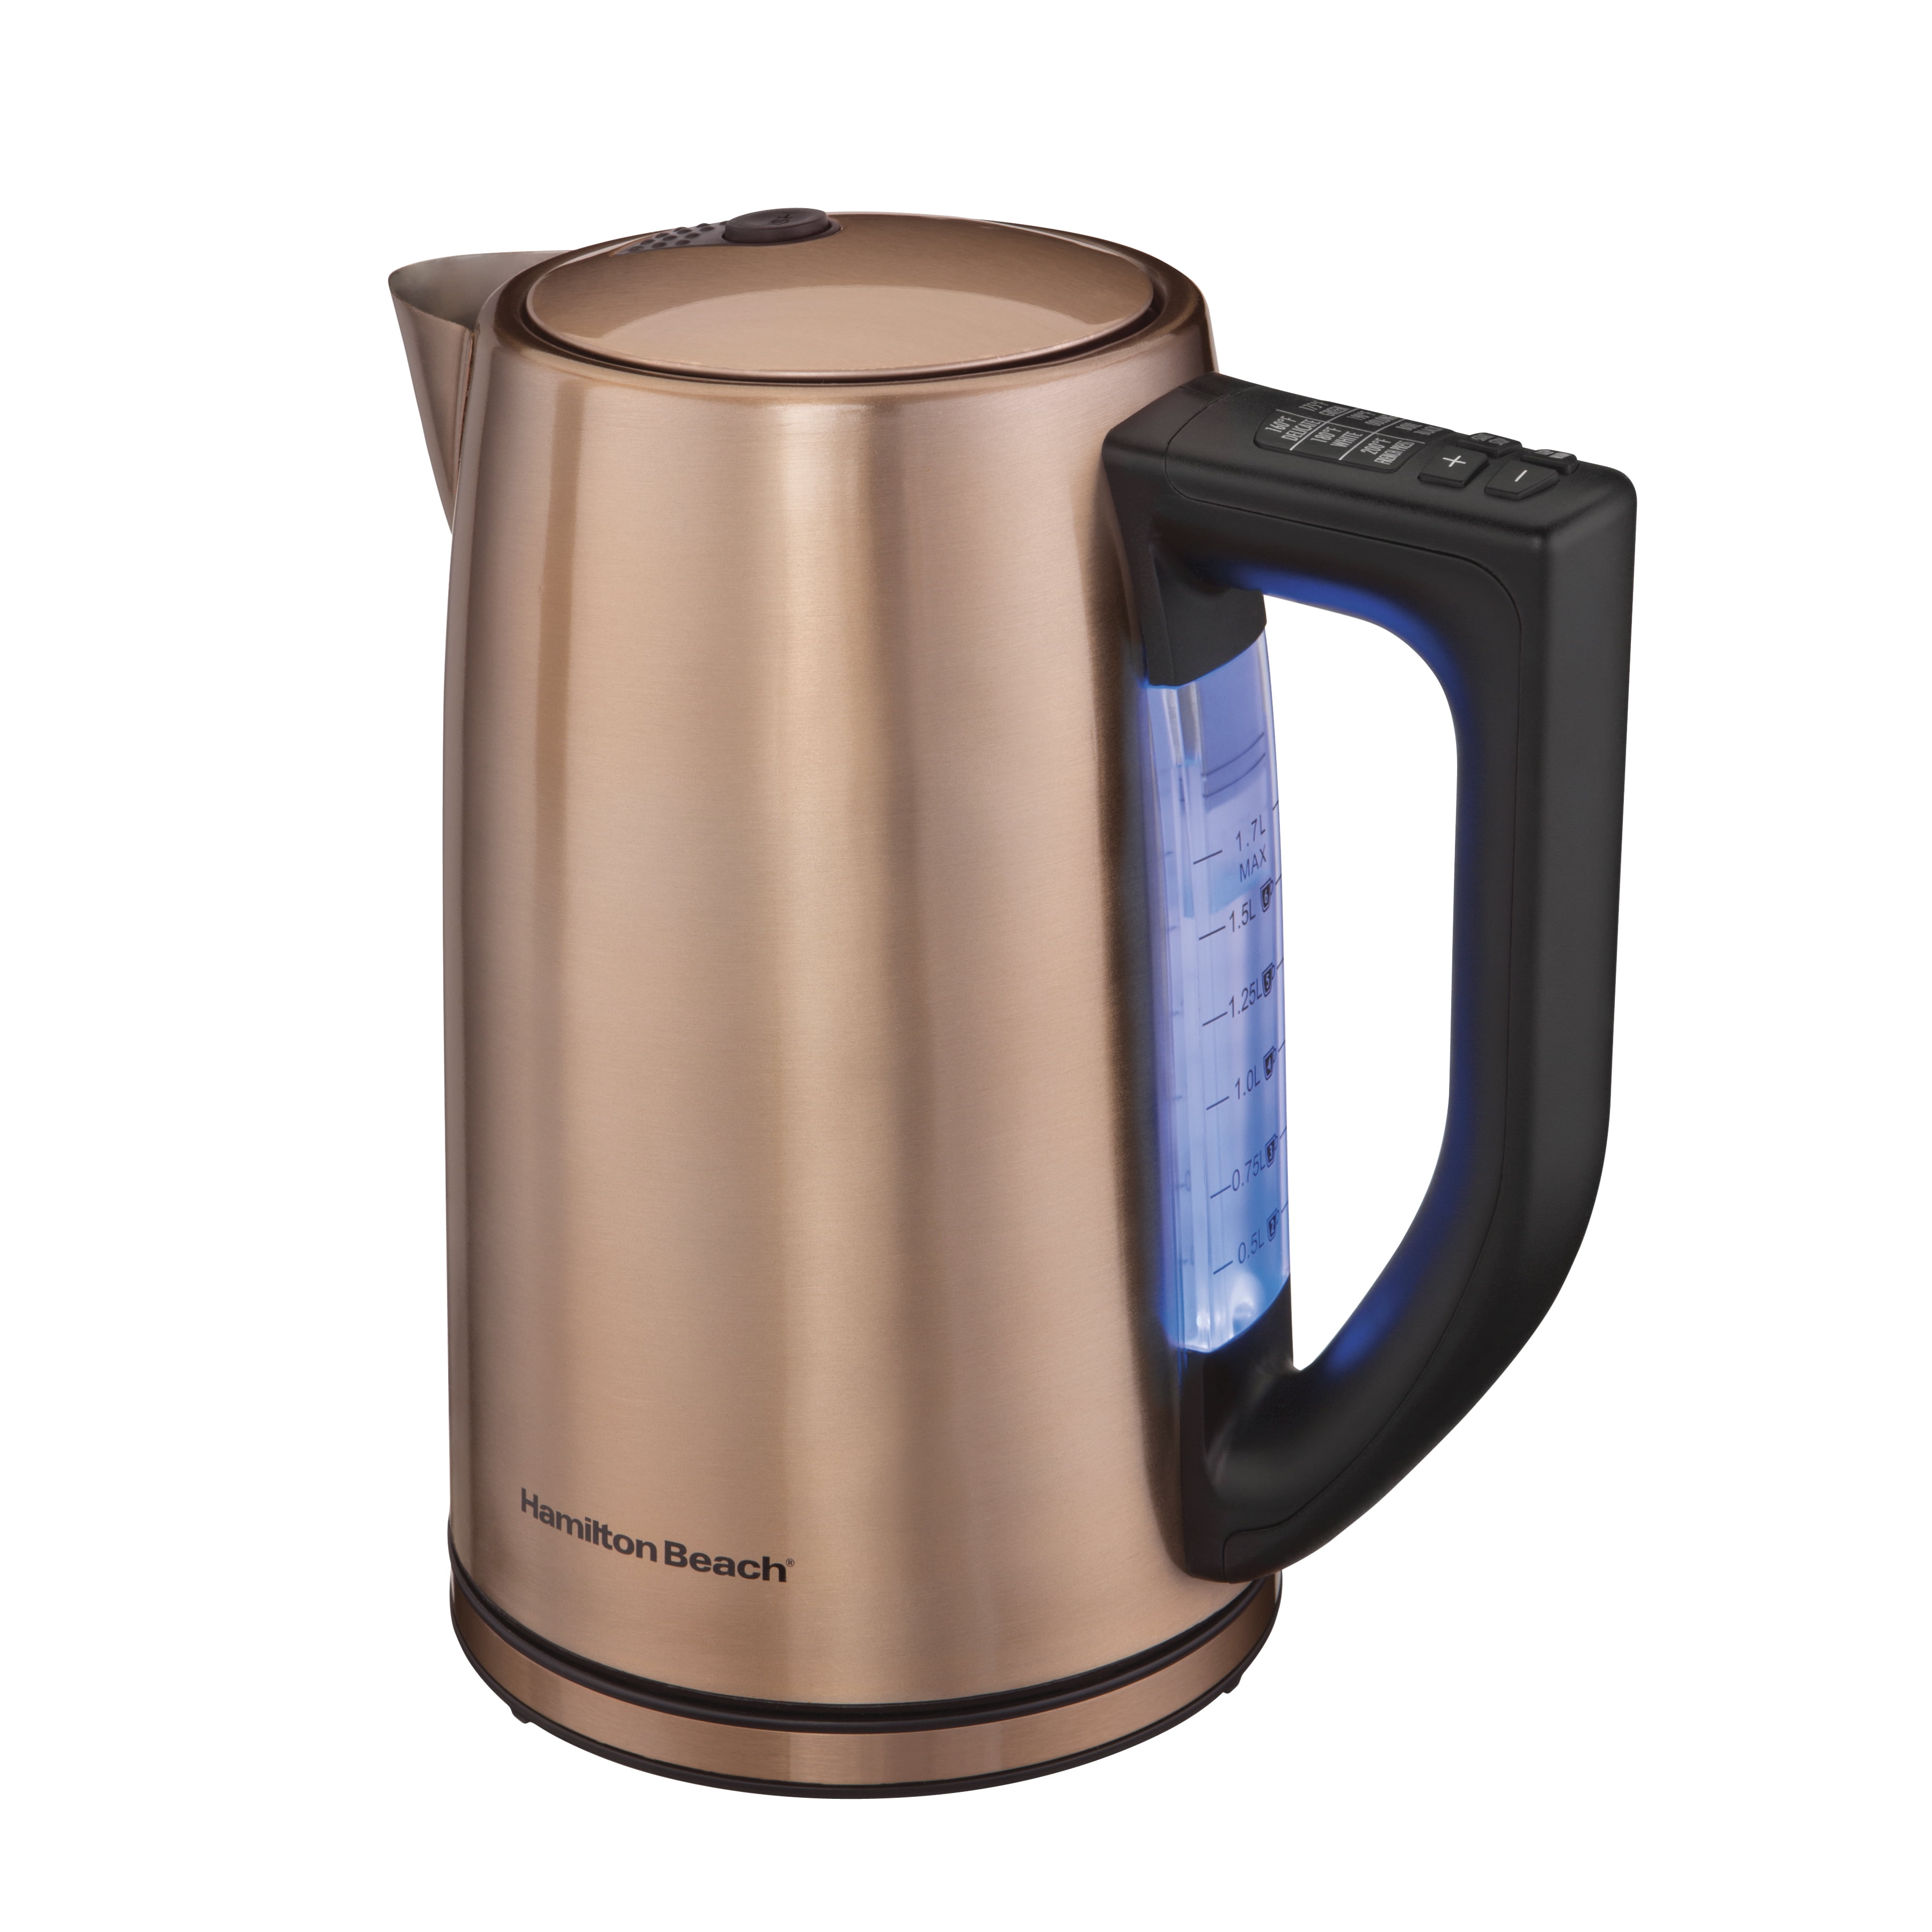 Anfilank Gooseneck Electric Kettle(1.0L), 100% Stainless Steel BPA